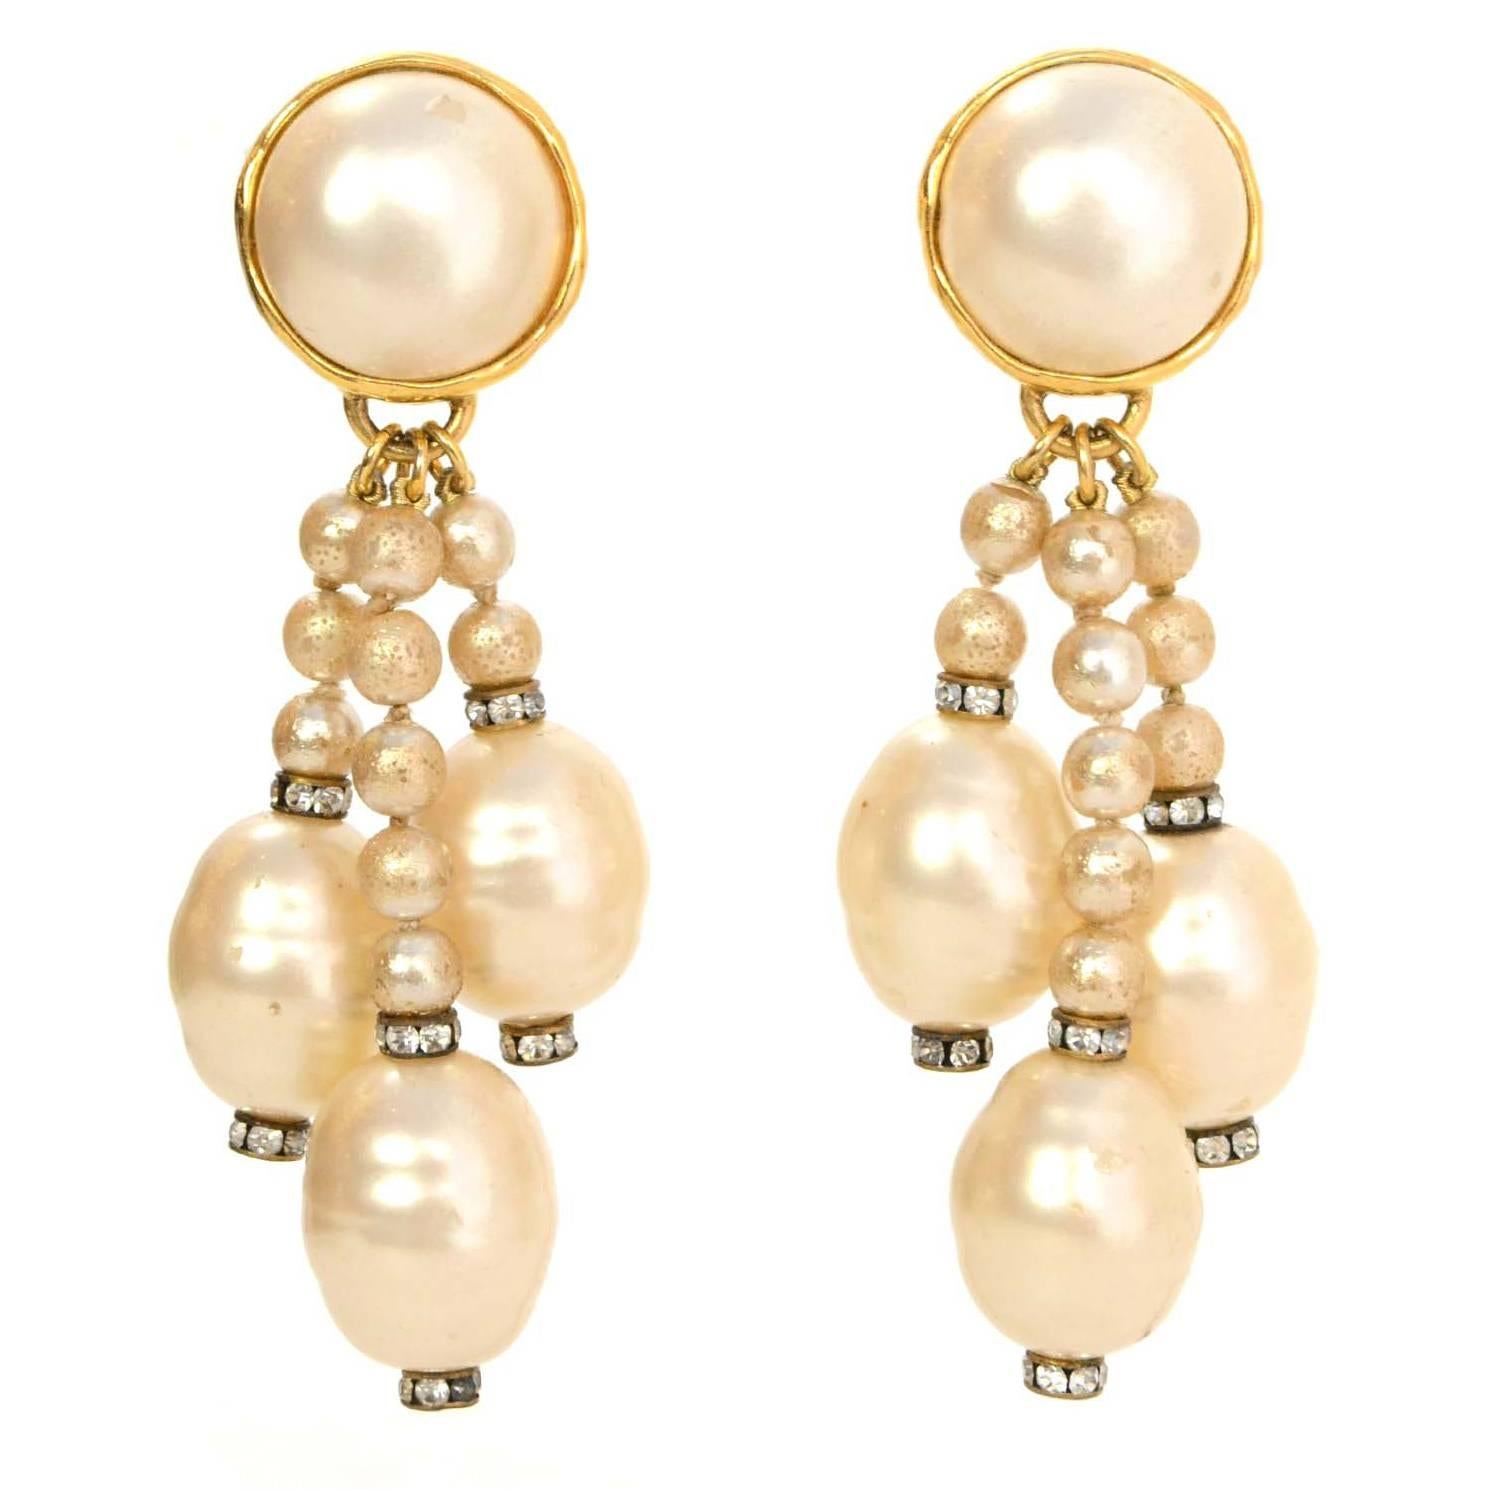 CHANEL Faux Pearl Clip On Earrings W/3 Hanging Strands of Pearls